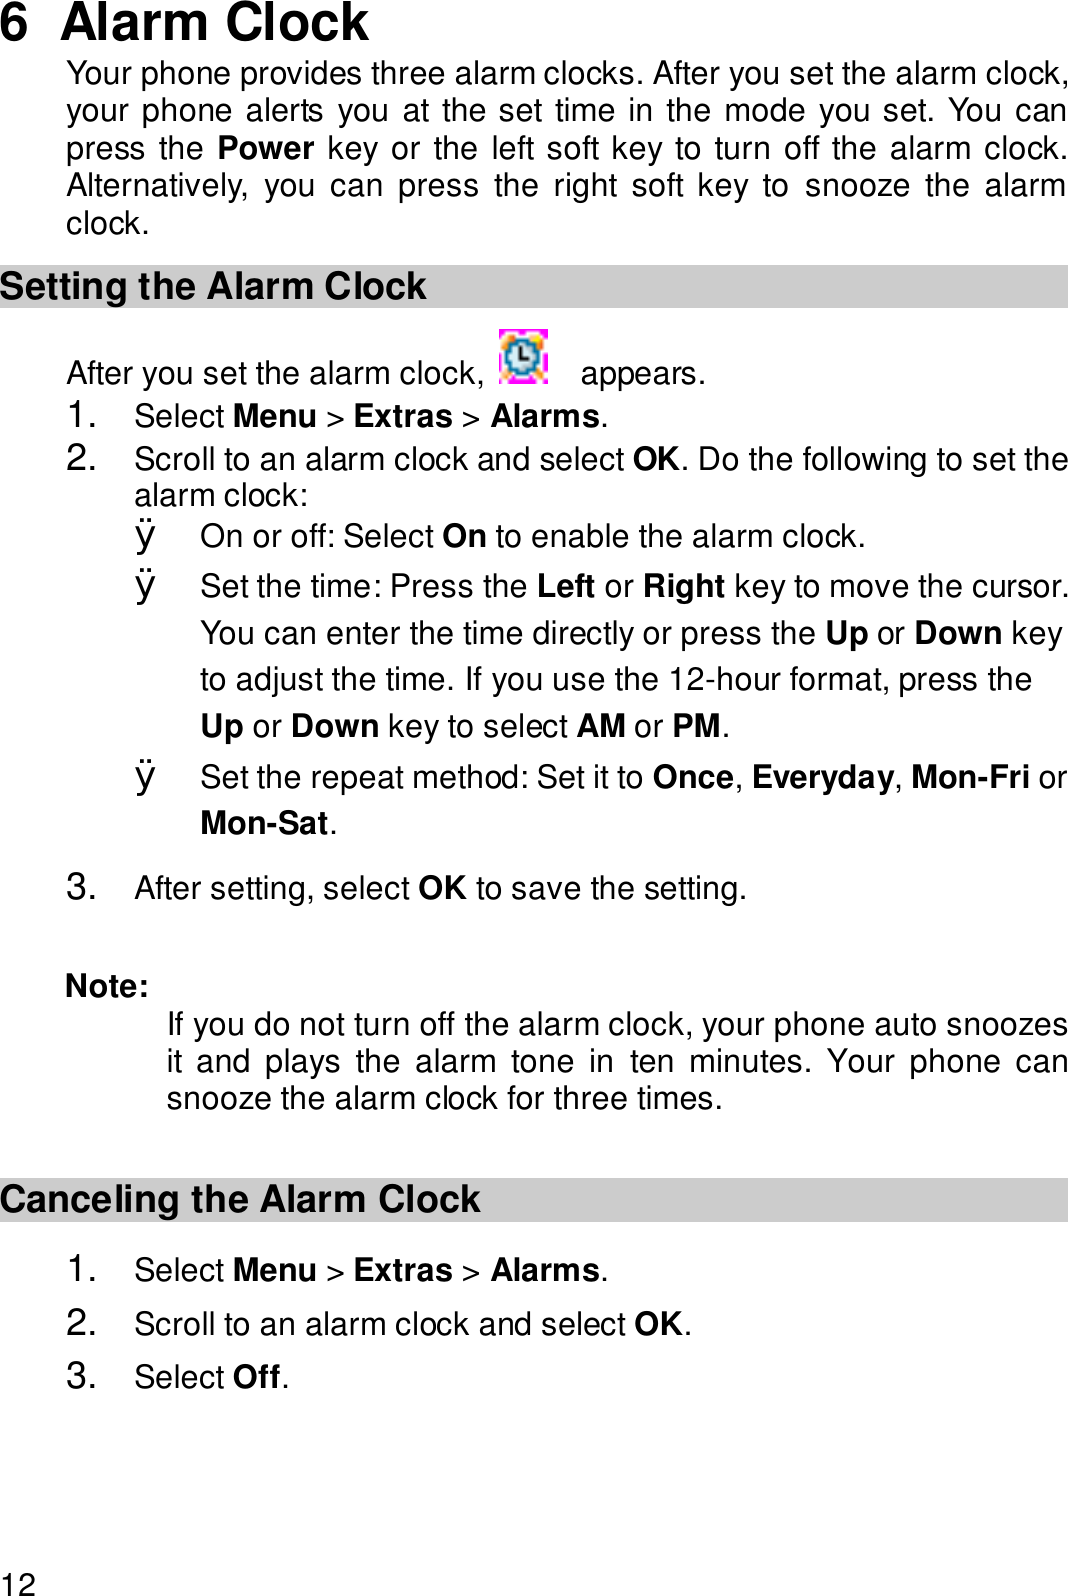  12 6  Alarm Clock Your phone provides three alarm clocks. After you set the alarm clock, your phone alerts you at the set time in the mode you set. You can press the Power key or the left soft key to turn off the alarm clock. Alternatively, you can press the right soft key to snooze the alarm clock. Setting the Alarm Clock After you set the alarm clock,   appears. 1.  Select Menu &gt; Extras &gt; Alarms. 2.  Scroll to an alarm clock and select OK. Do the following to set the alarm clock: Ø On or off: Select On to enable the alarm clock. Ø Set the time: Press the Left or Right key to move the cursor. You can enter the time directly or press the Up or Down key to adjust the time. If you use the 12-hour format, press the Up or Down key to select AM or PM. Ø Set the repeat method: Set it to Once, Everyday, Mon-Fri or Mon-Sat. 3.  After setting, select OK to save the setting.  Note:  If you do not turn off the alarm clock, your phone auto snoozes it and plays the alarm tone in ten minutes. Your phone can snooze the alarm clock for three times.  Canceling the Alarm Clock 1.  Select Menu &gt; Extras &gt; Alarms. 2.  Scroll to an alarm clock and select OK. 3.  Select Off. 